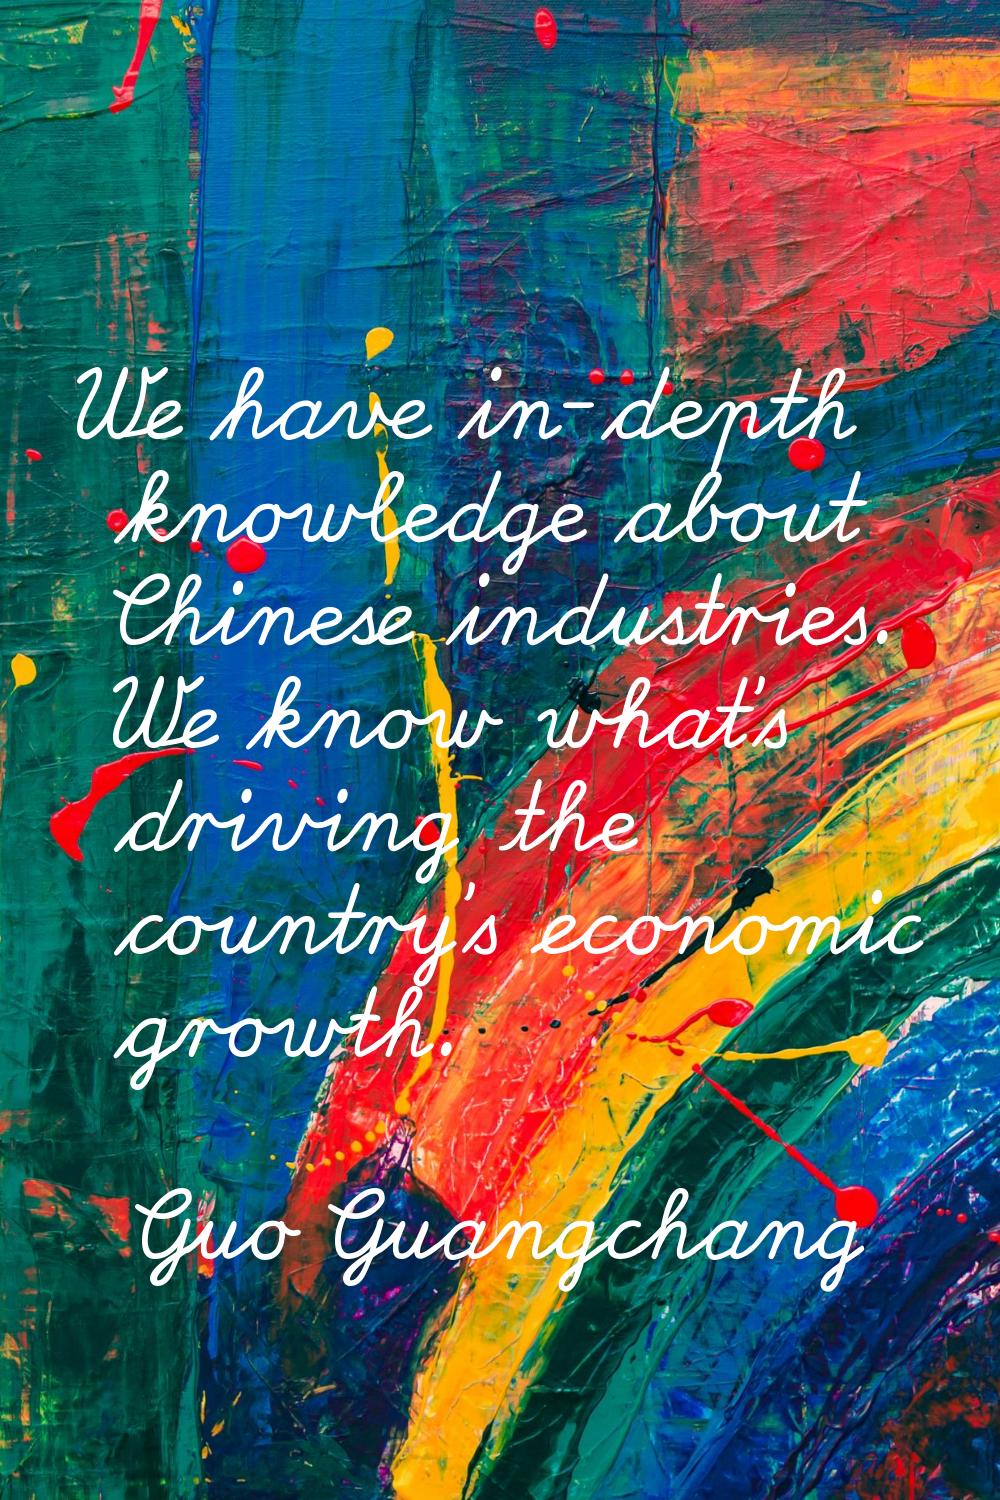 We have in-depth knowledge about Chinese industries. We know what's driving the country's economic 